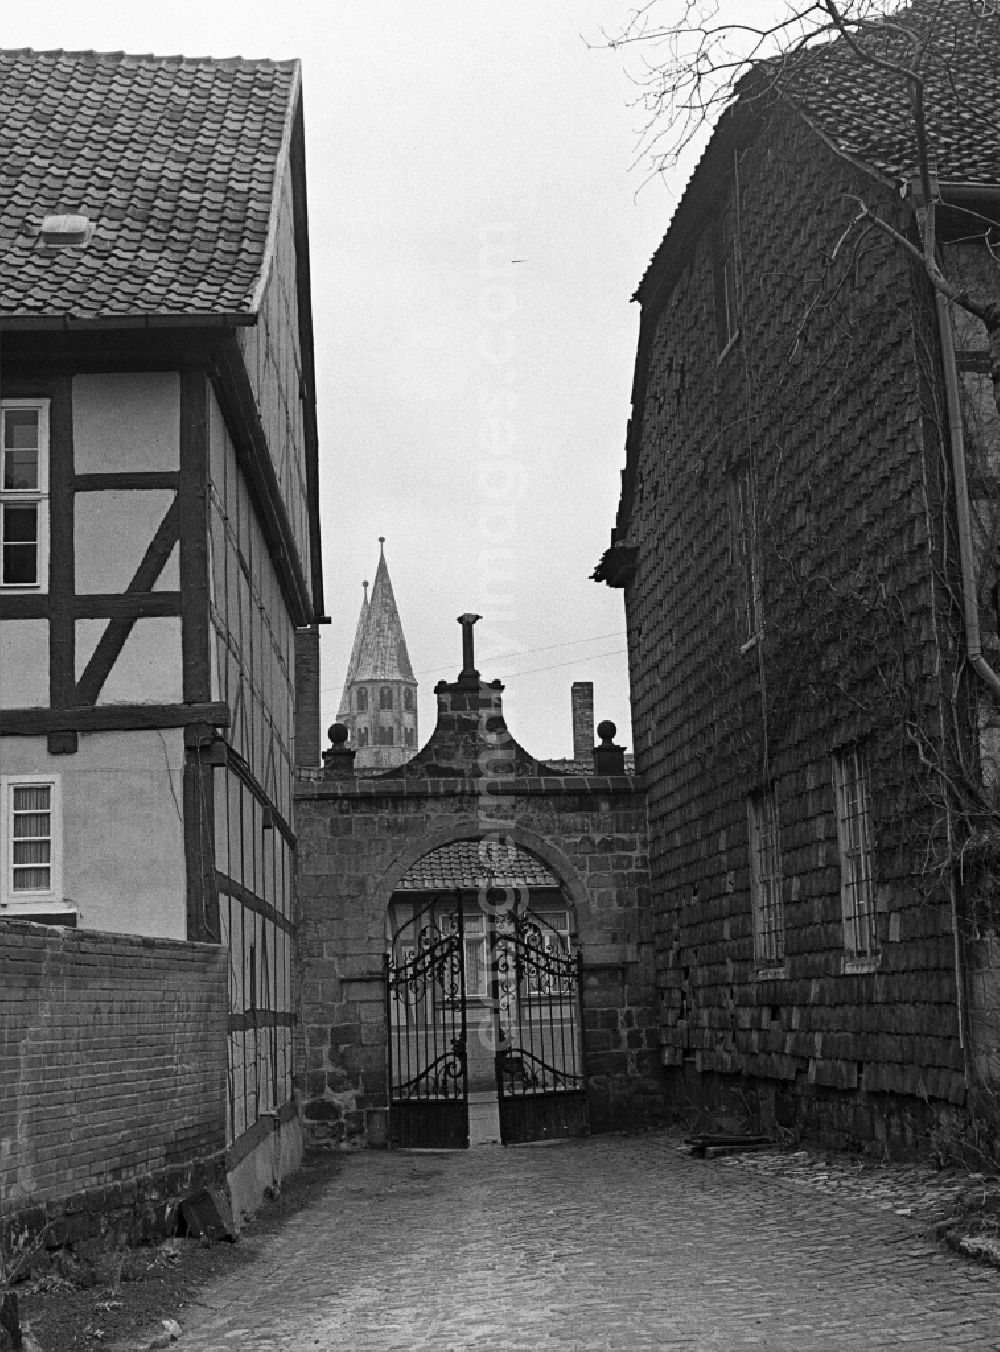 GDR photo archive: Halberstadt - Gate to the entrance area to the inner courtyard of the Johanniskirche in Halberstadt in the state Saxony-Anhalt on the territory of the former GDR, German Democratic Republic